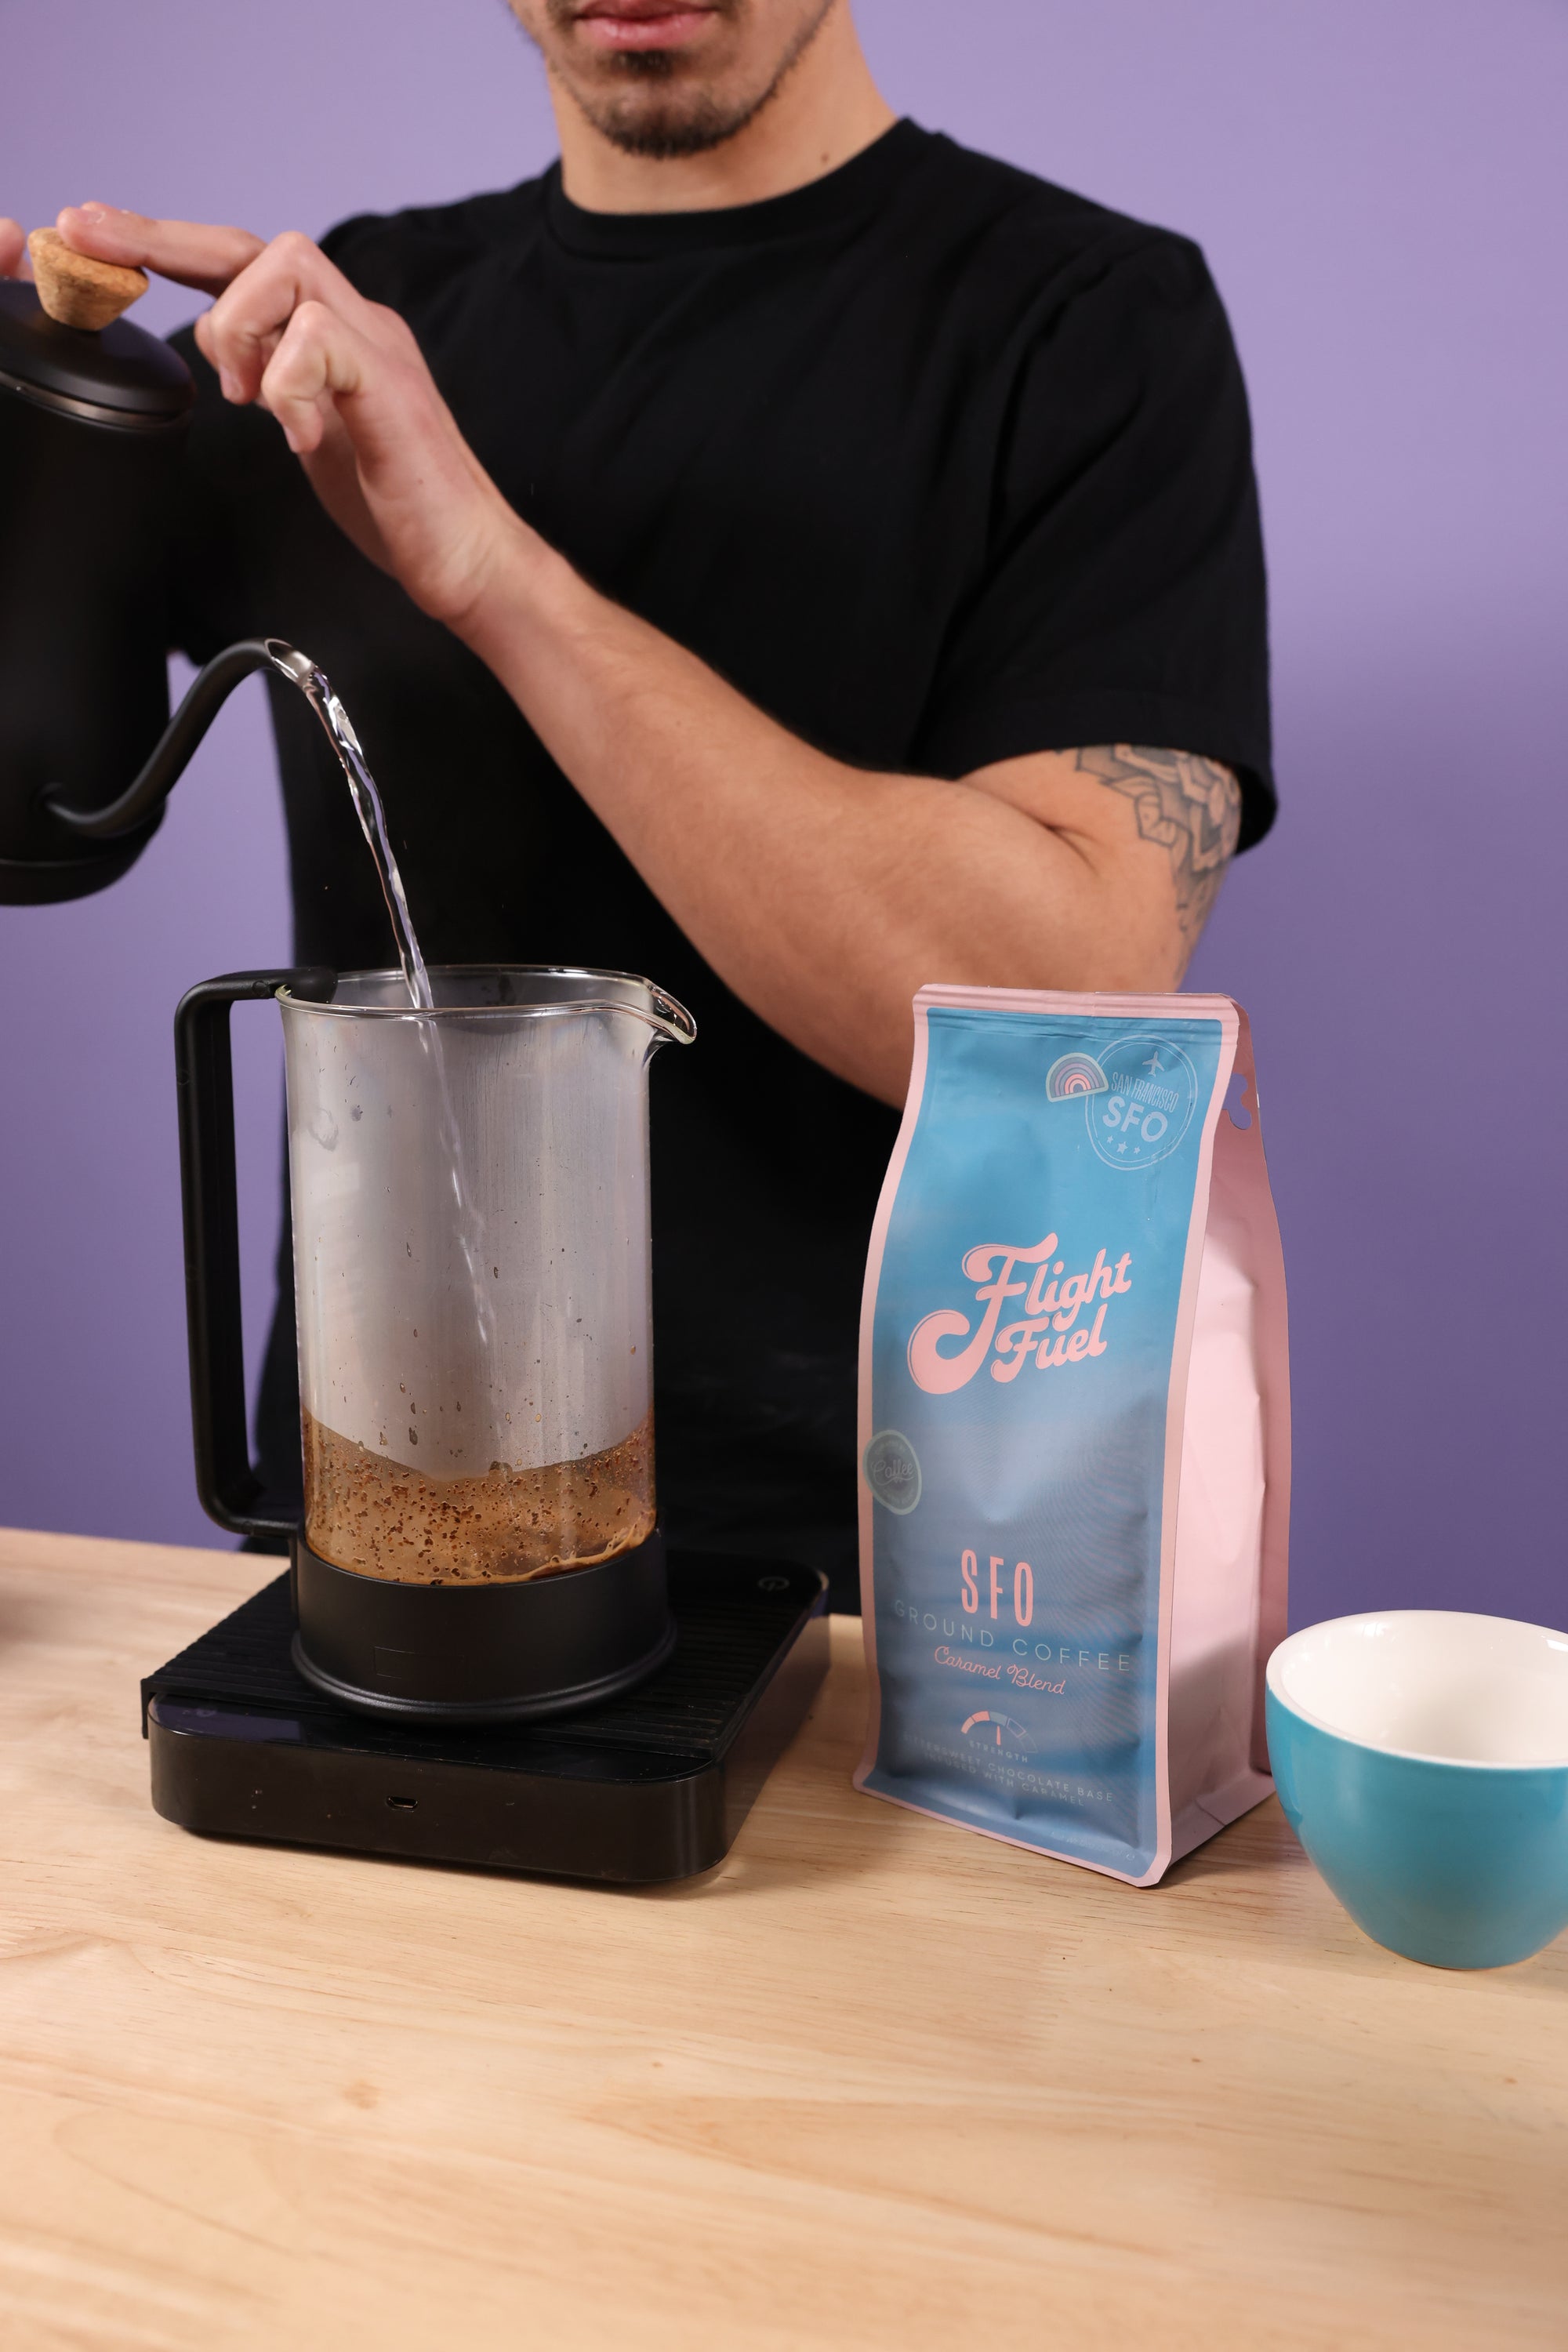 Barista making caramel coffee in a french press.